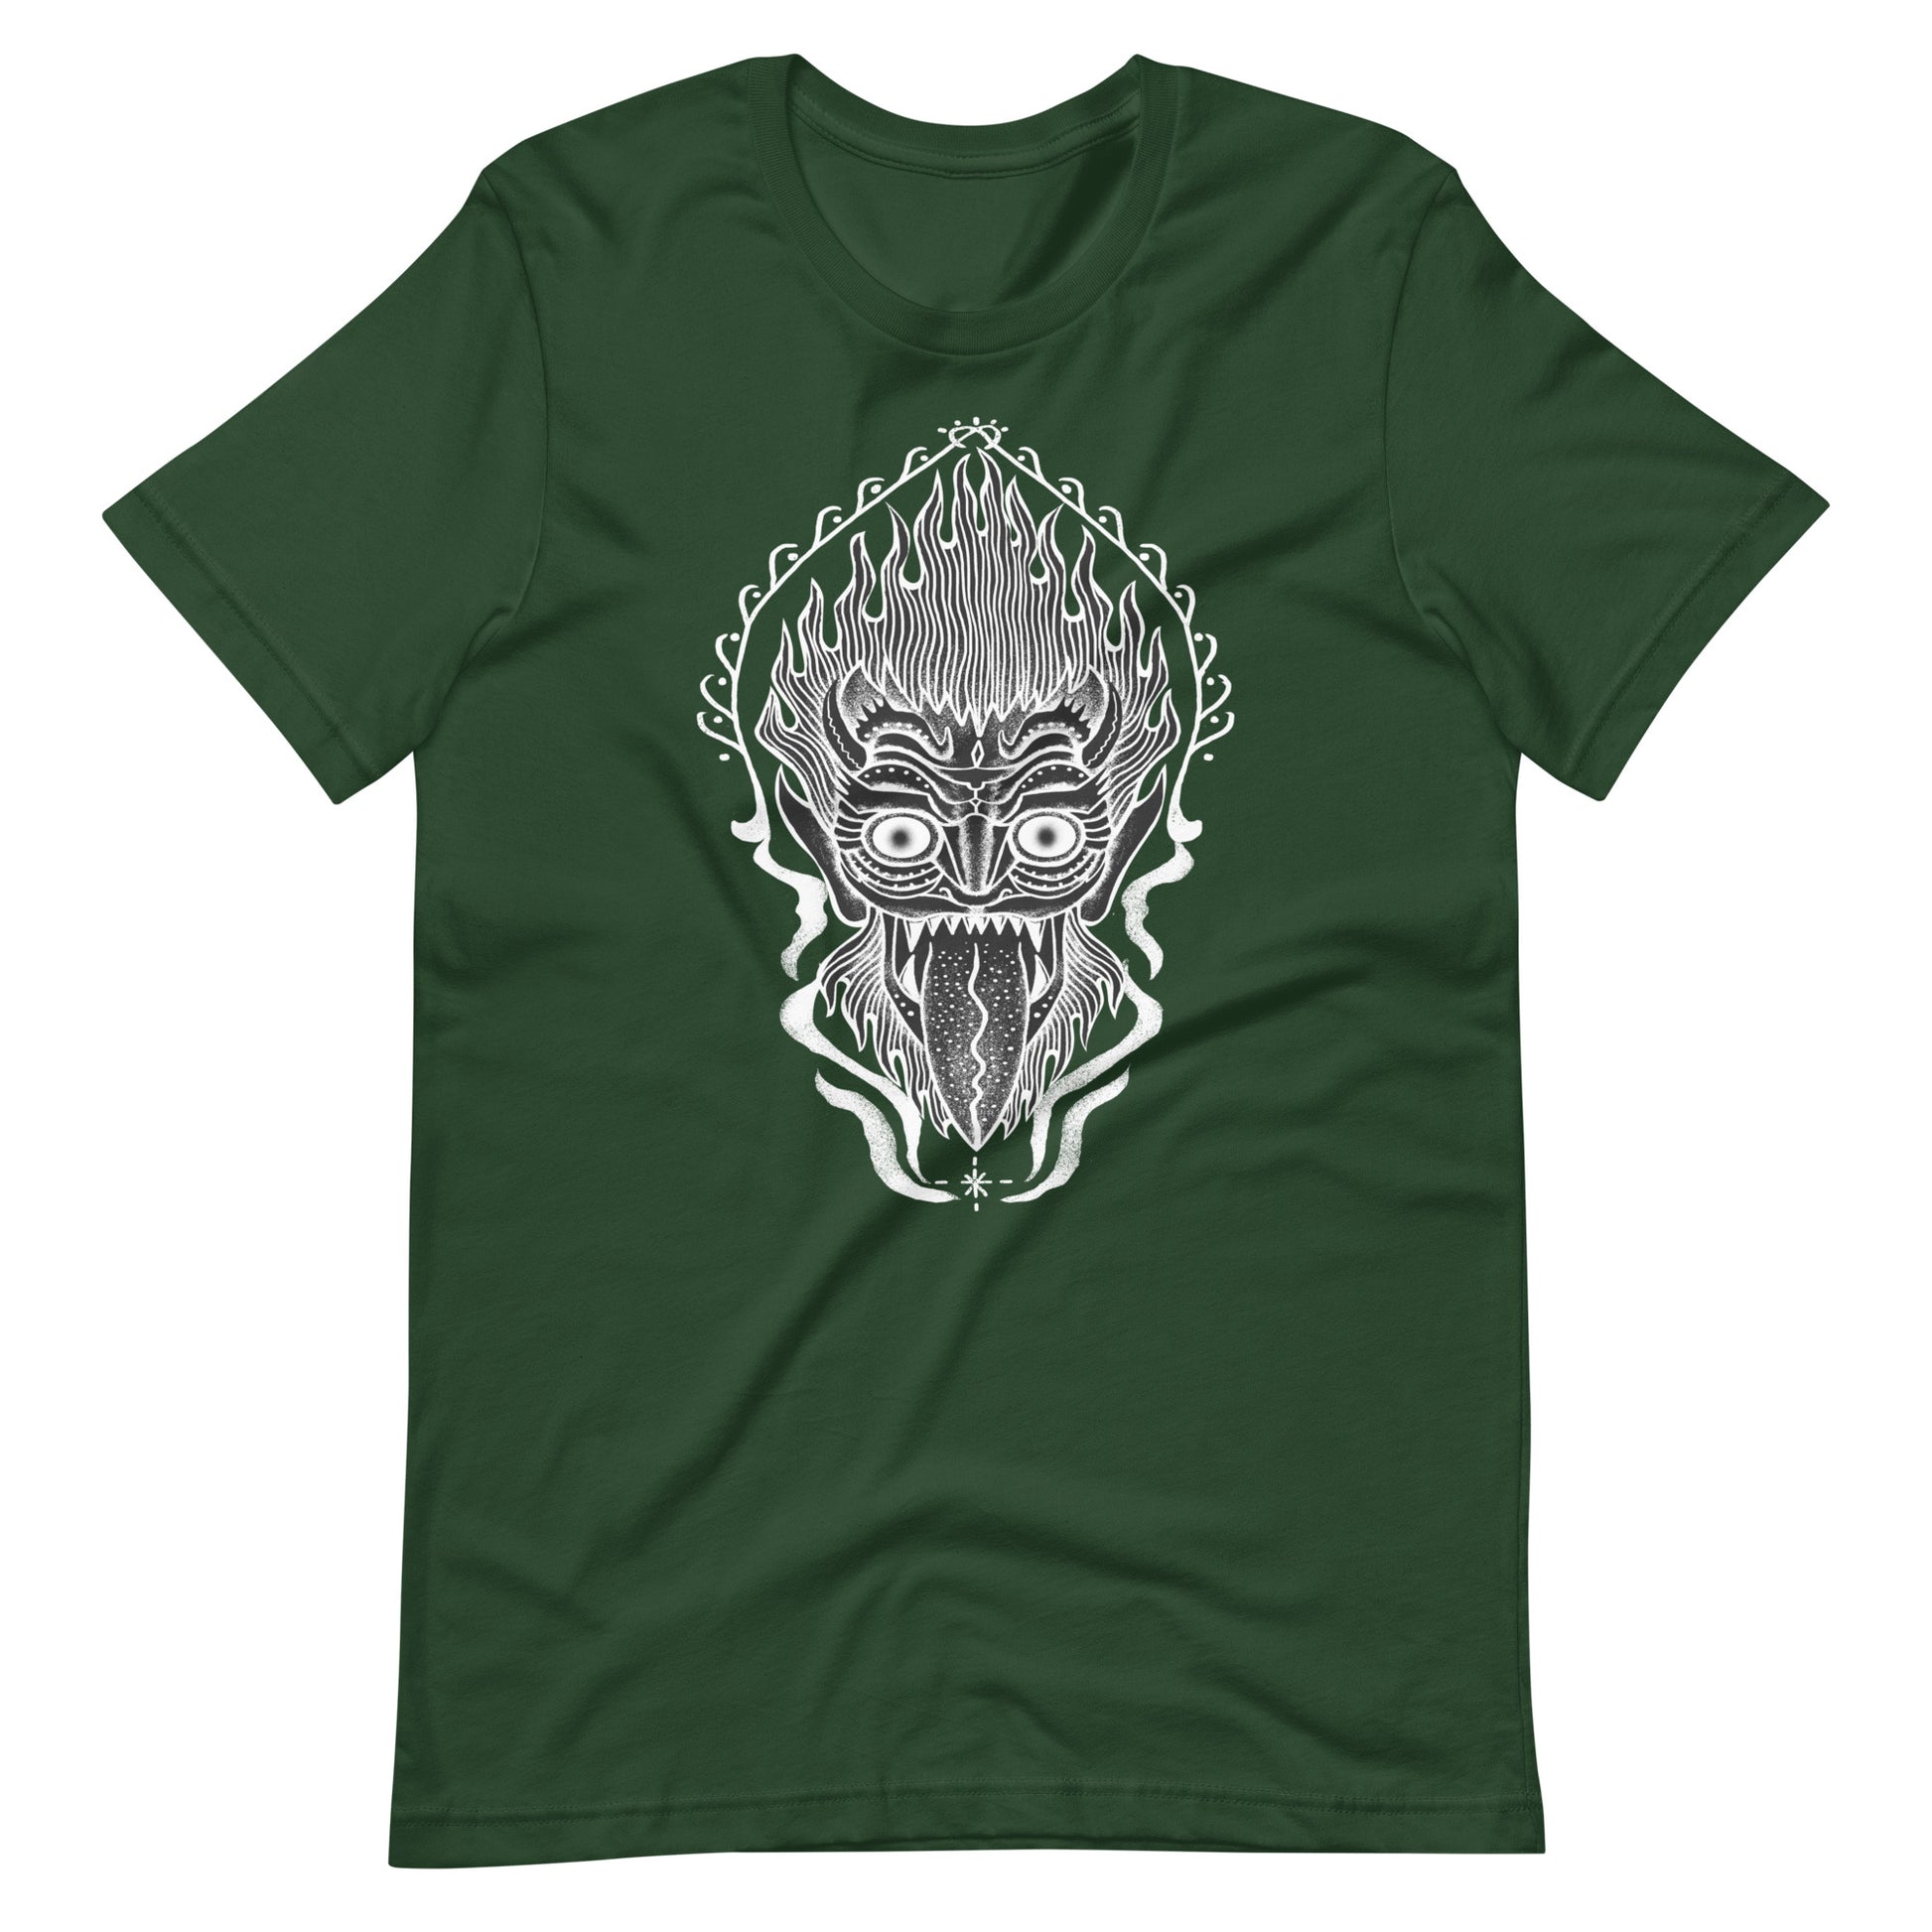 King of Fire - Men's t-shirt - Forest Front